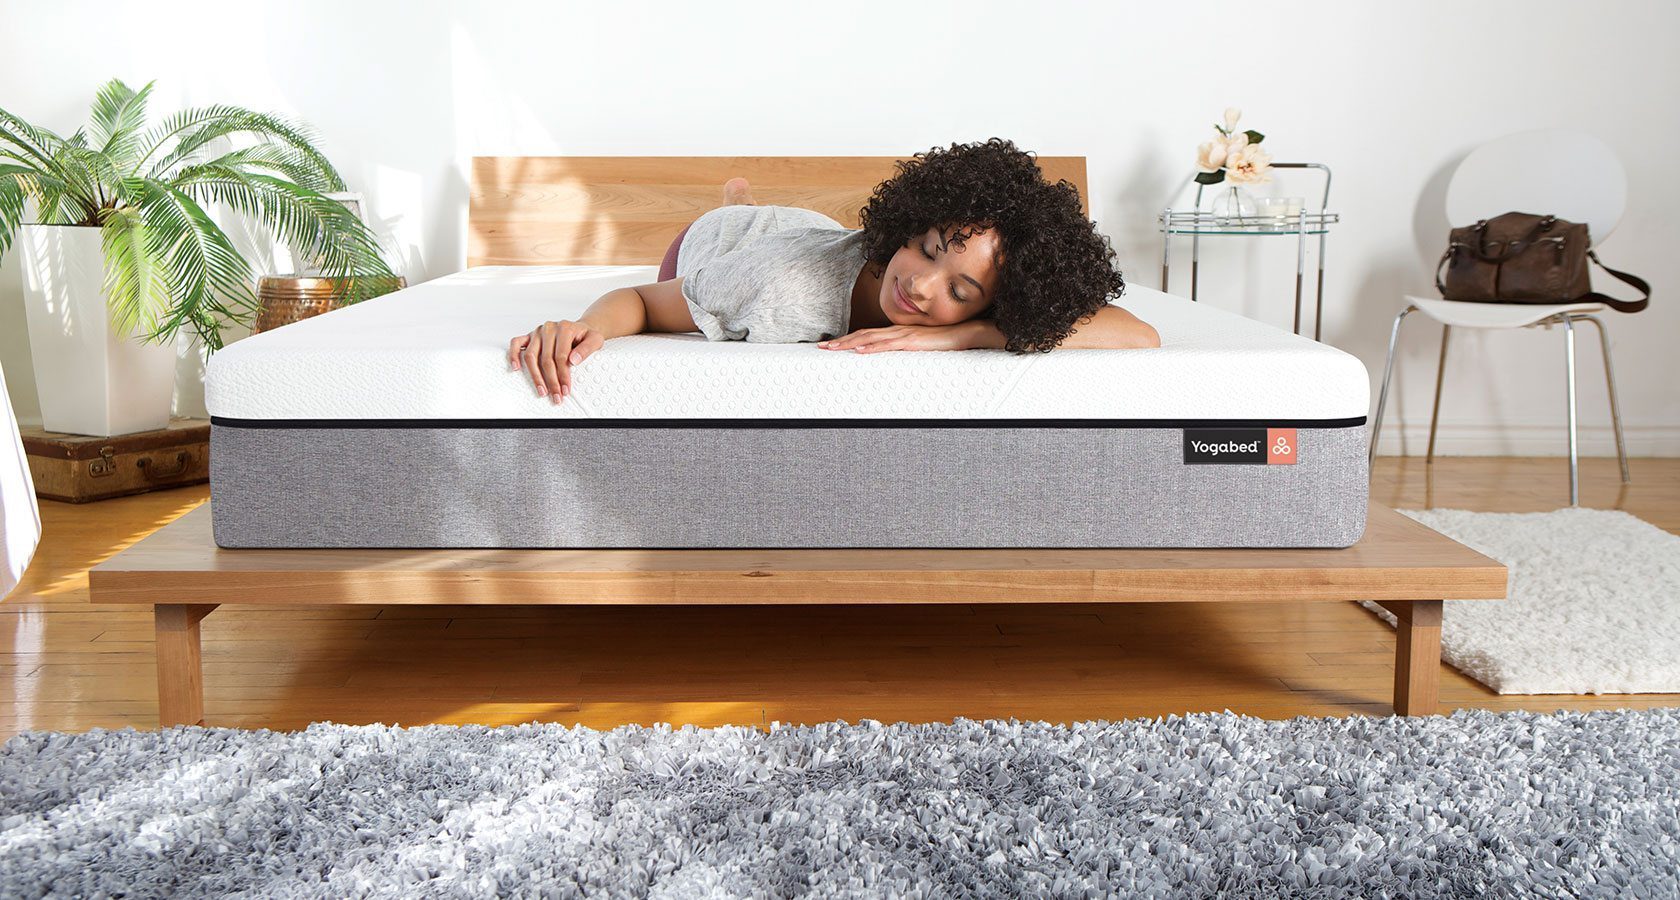 The YogaBed Review: A Memory Foam Mattress in a Box 7